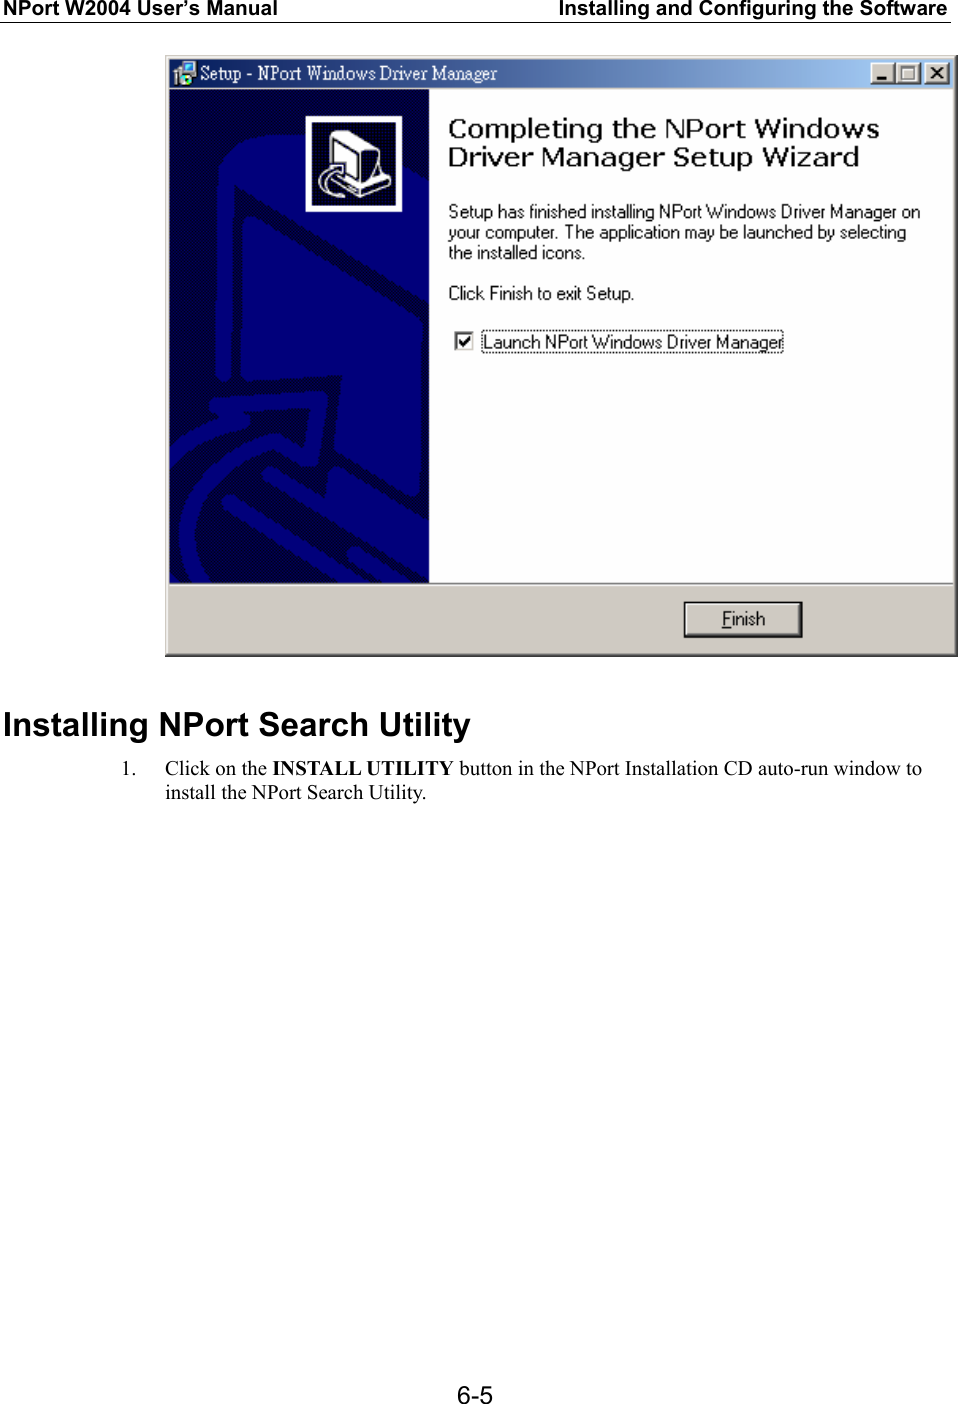 NPort W2004 User’s Manual  Installing and Configuring the Software  6-5  Installing NPort Search Utility 1. Click on the INSTALL UTILITY button in the NPort Installation CD auto-run window to install the NPort Search Utility. 